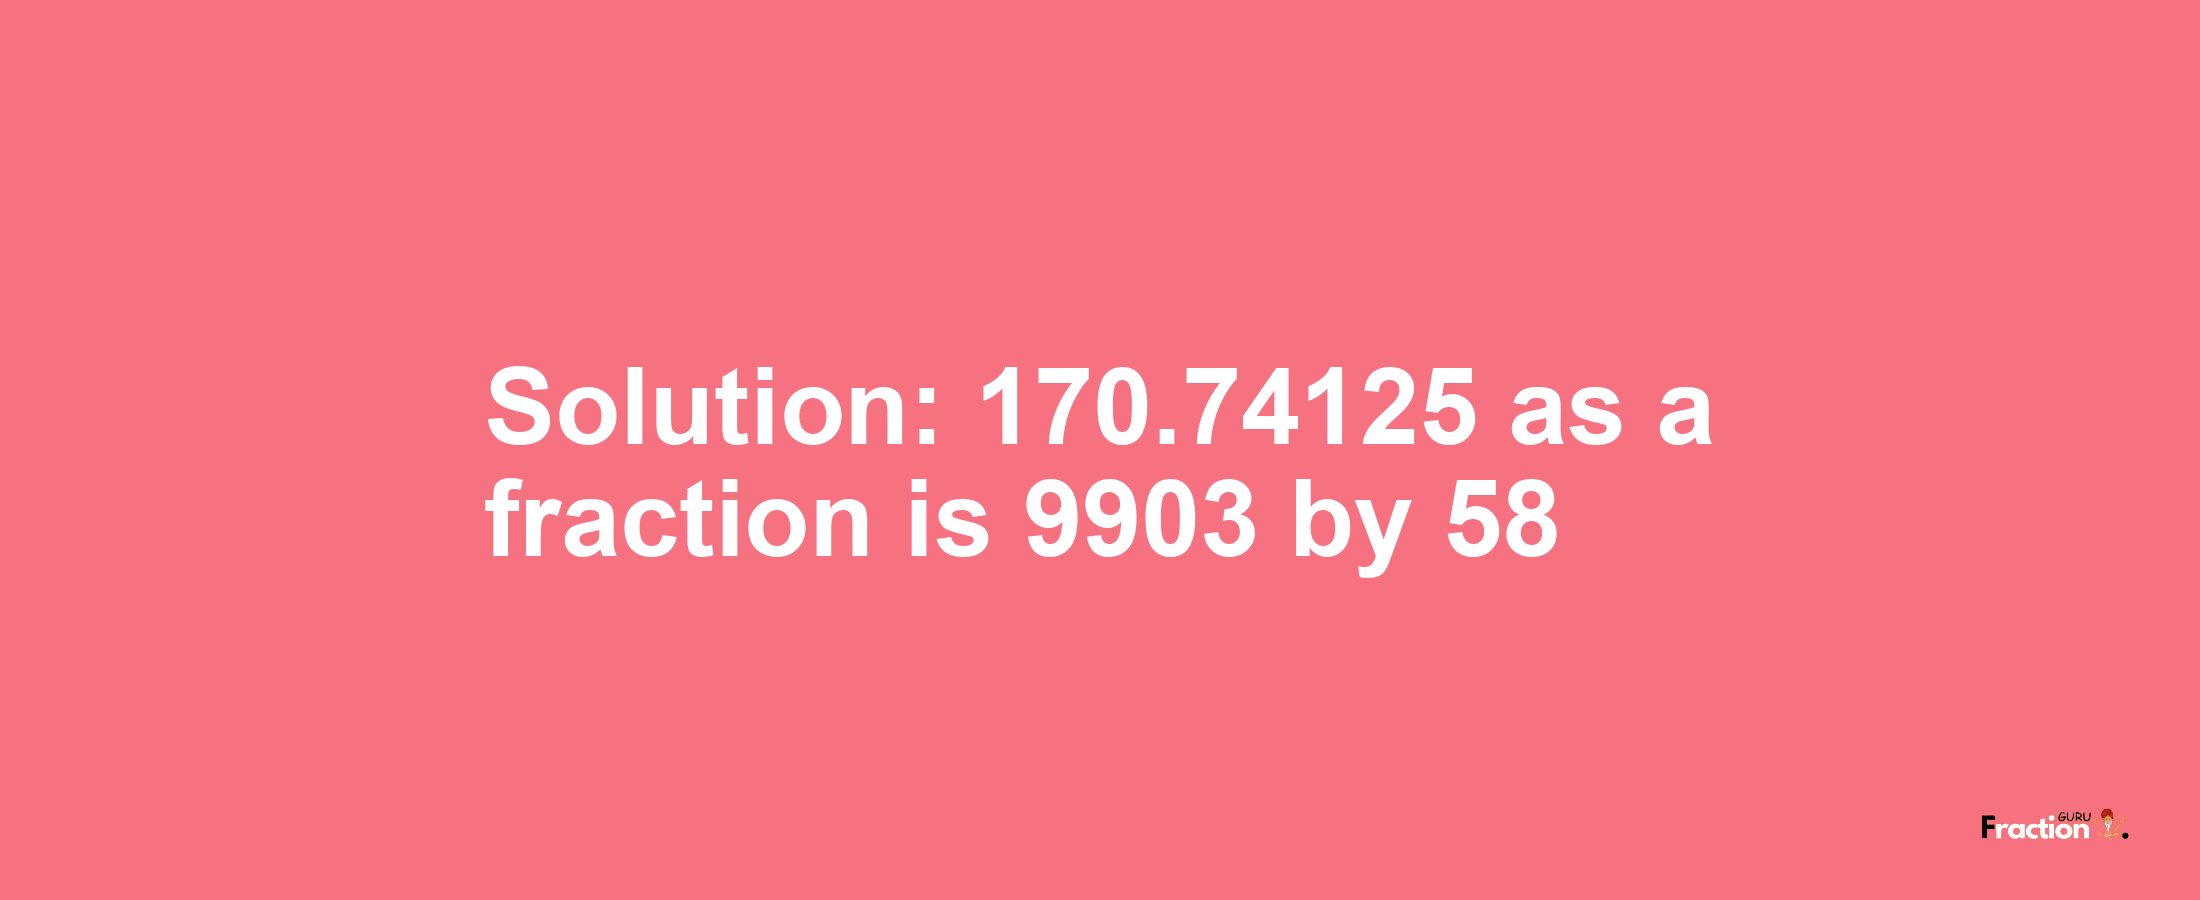 Solution:170.74125 as a fraction is 9903/58